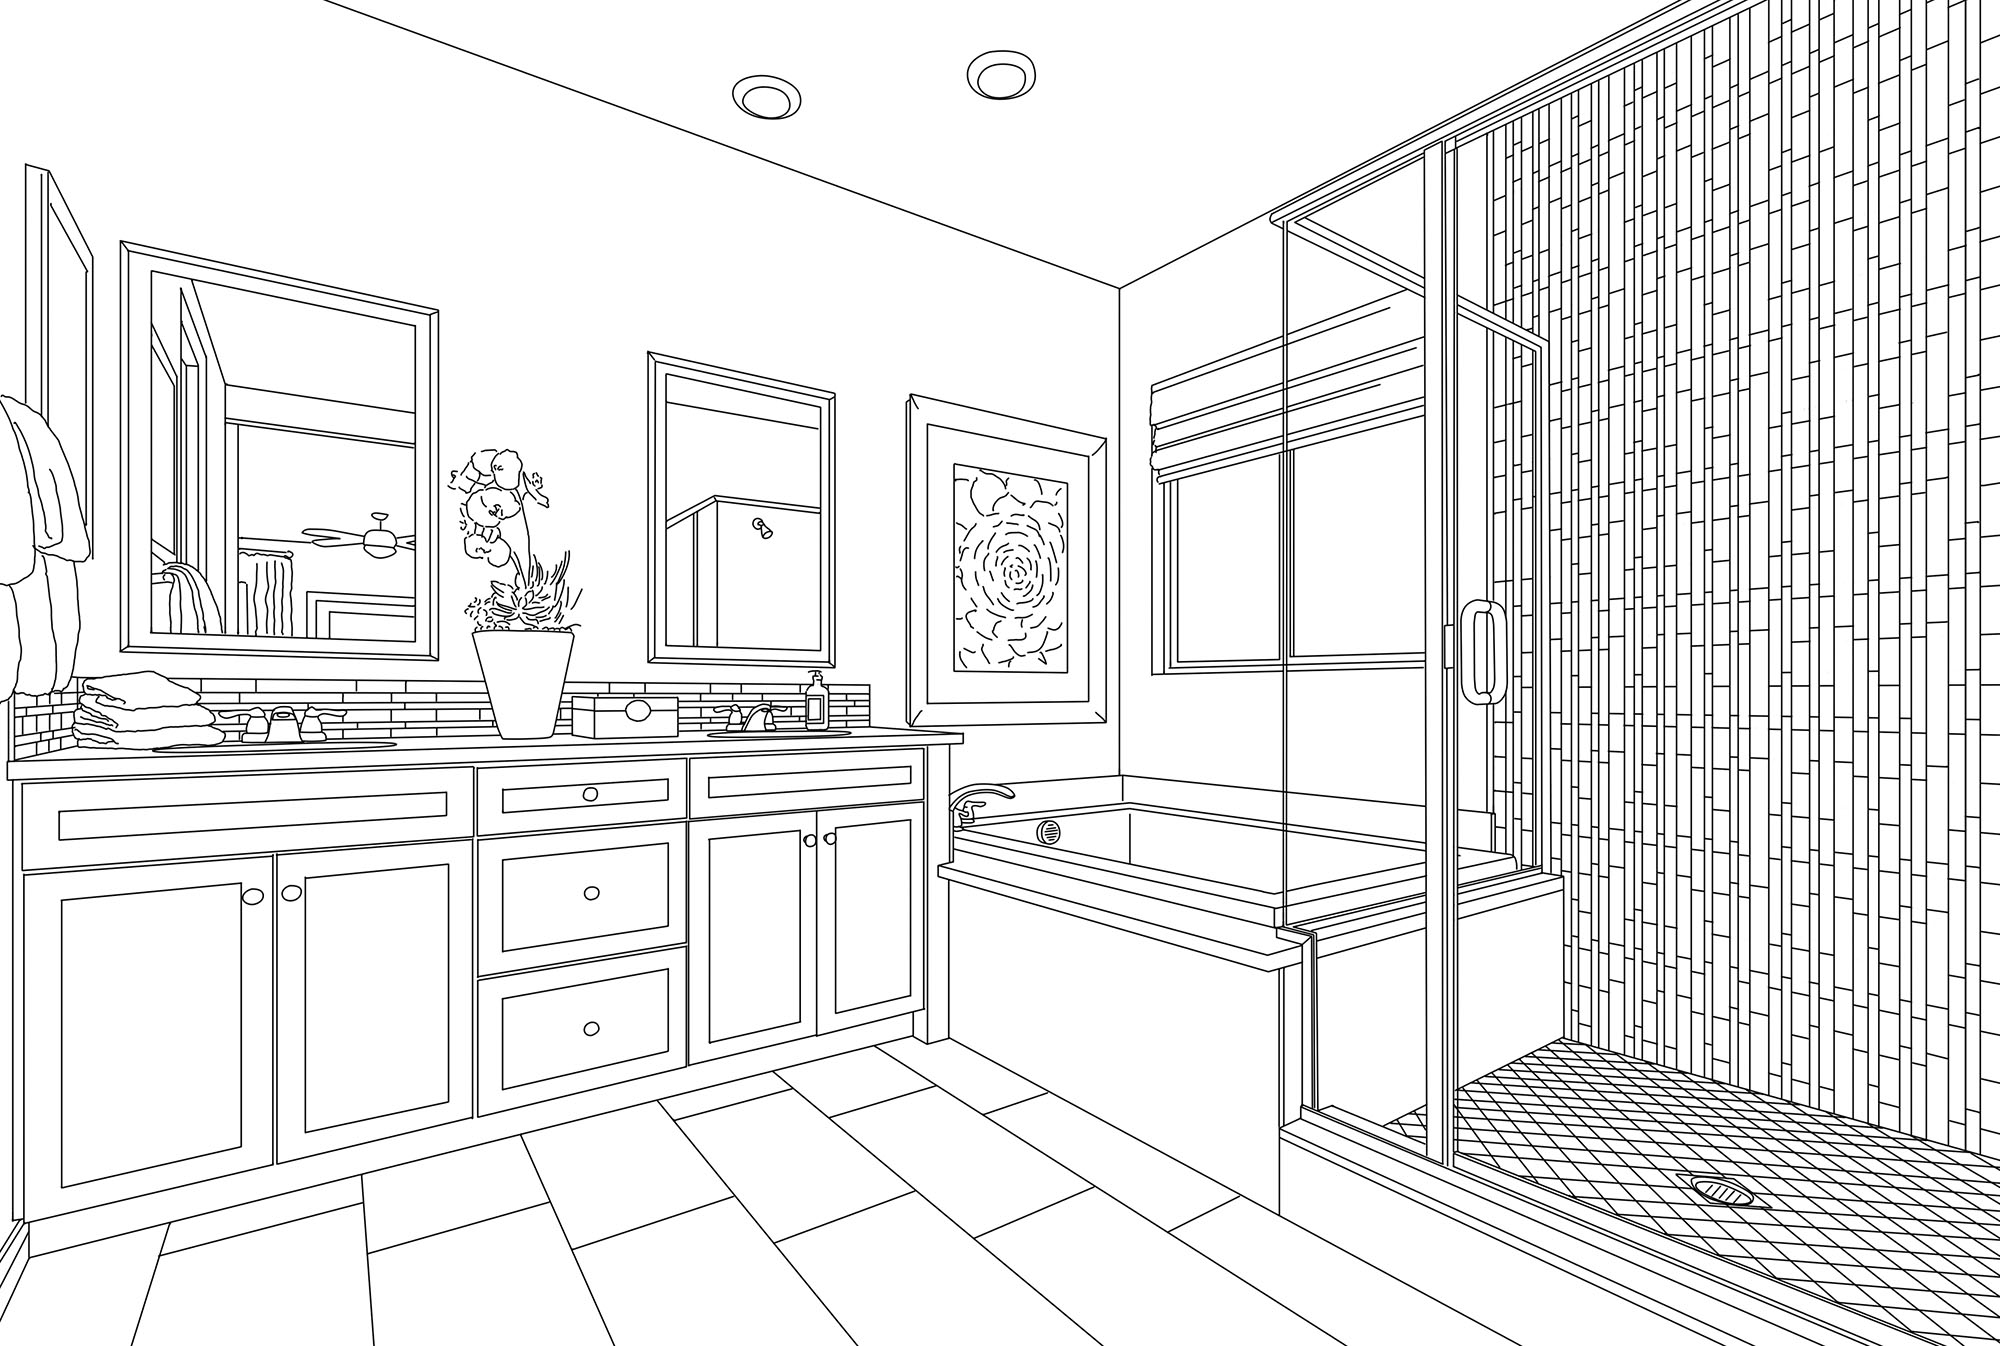 Stage 1 Detailed drawing of a new bathroom